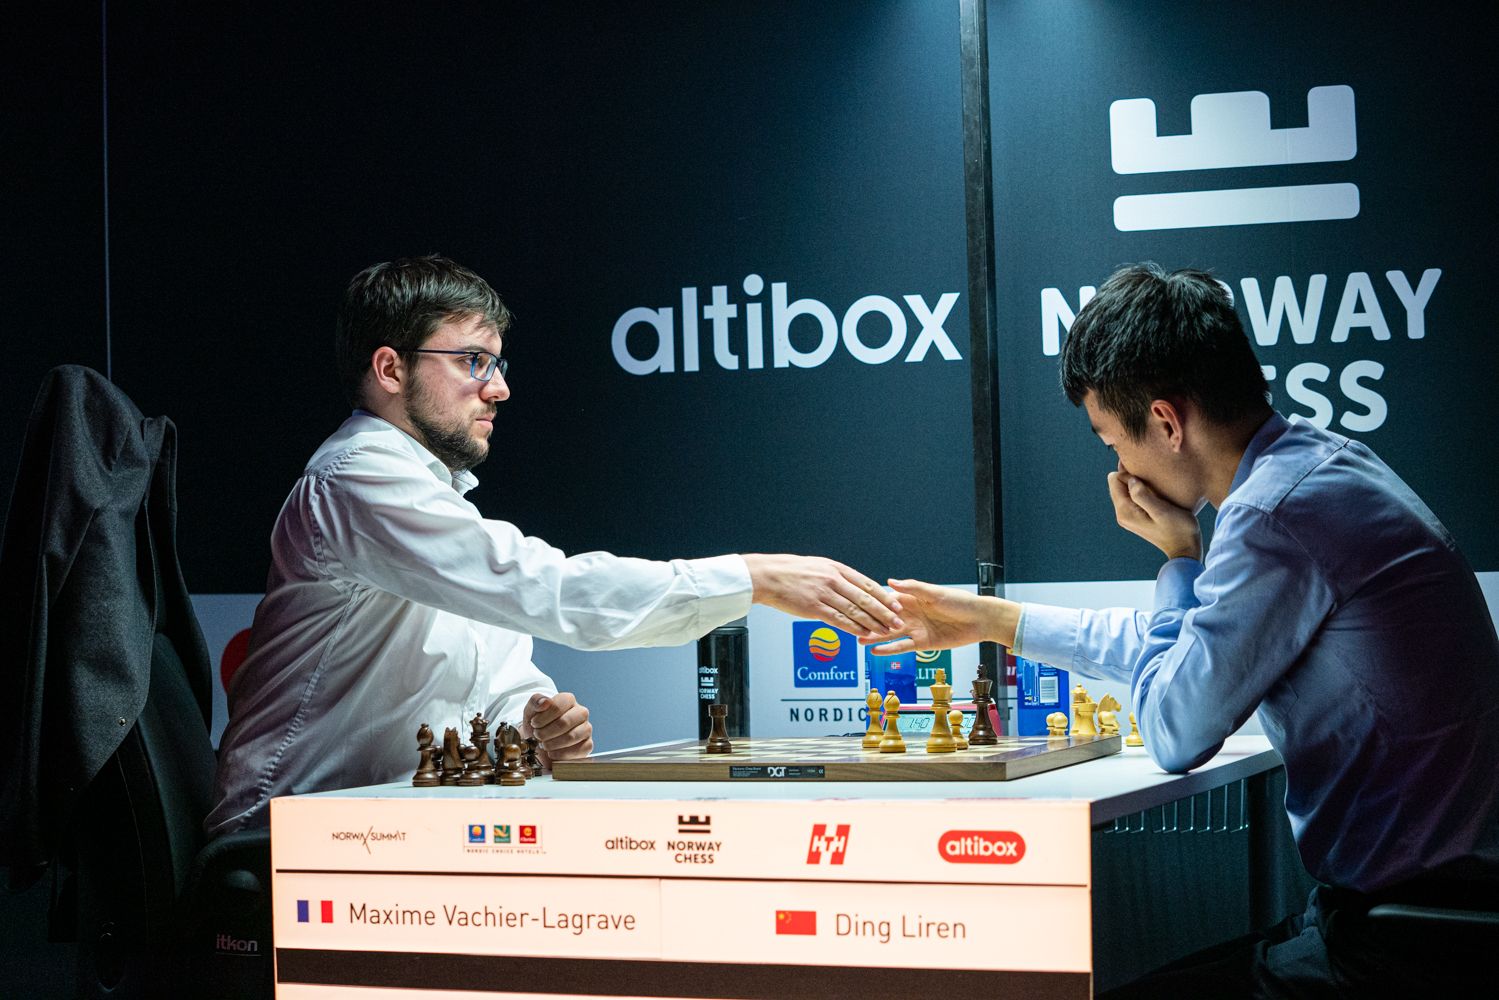 Magnus Carlsen wins Norway Chess with a round to spare